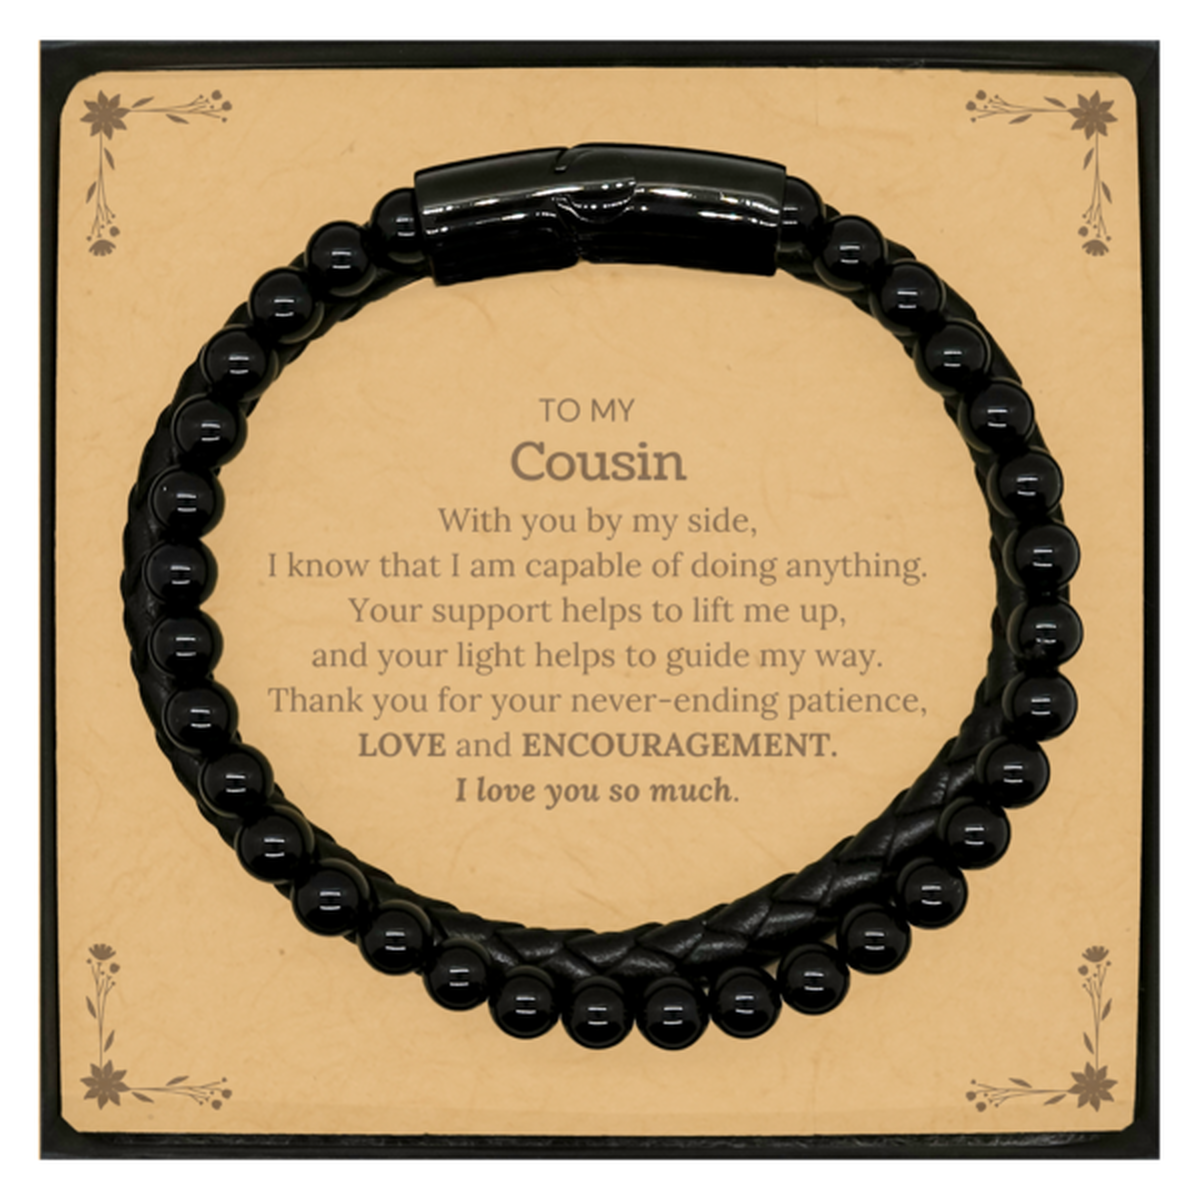 Appreciation Cousin Stone Leather Bracelets Gifts, To My Cousin Birthday Christmas Wedding Keepsake Gifts for Cousin With you by my side, I know that I am capable of doing anything. I love you so much